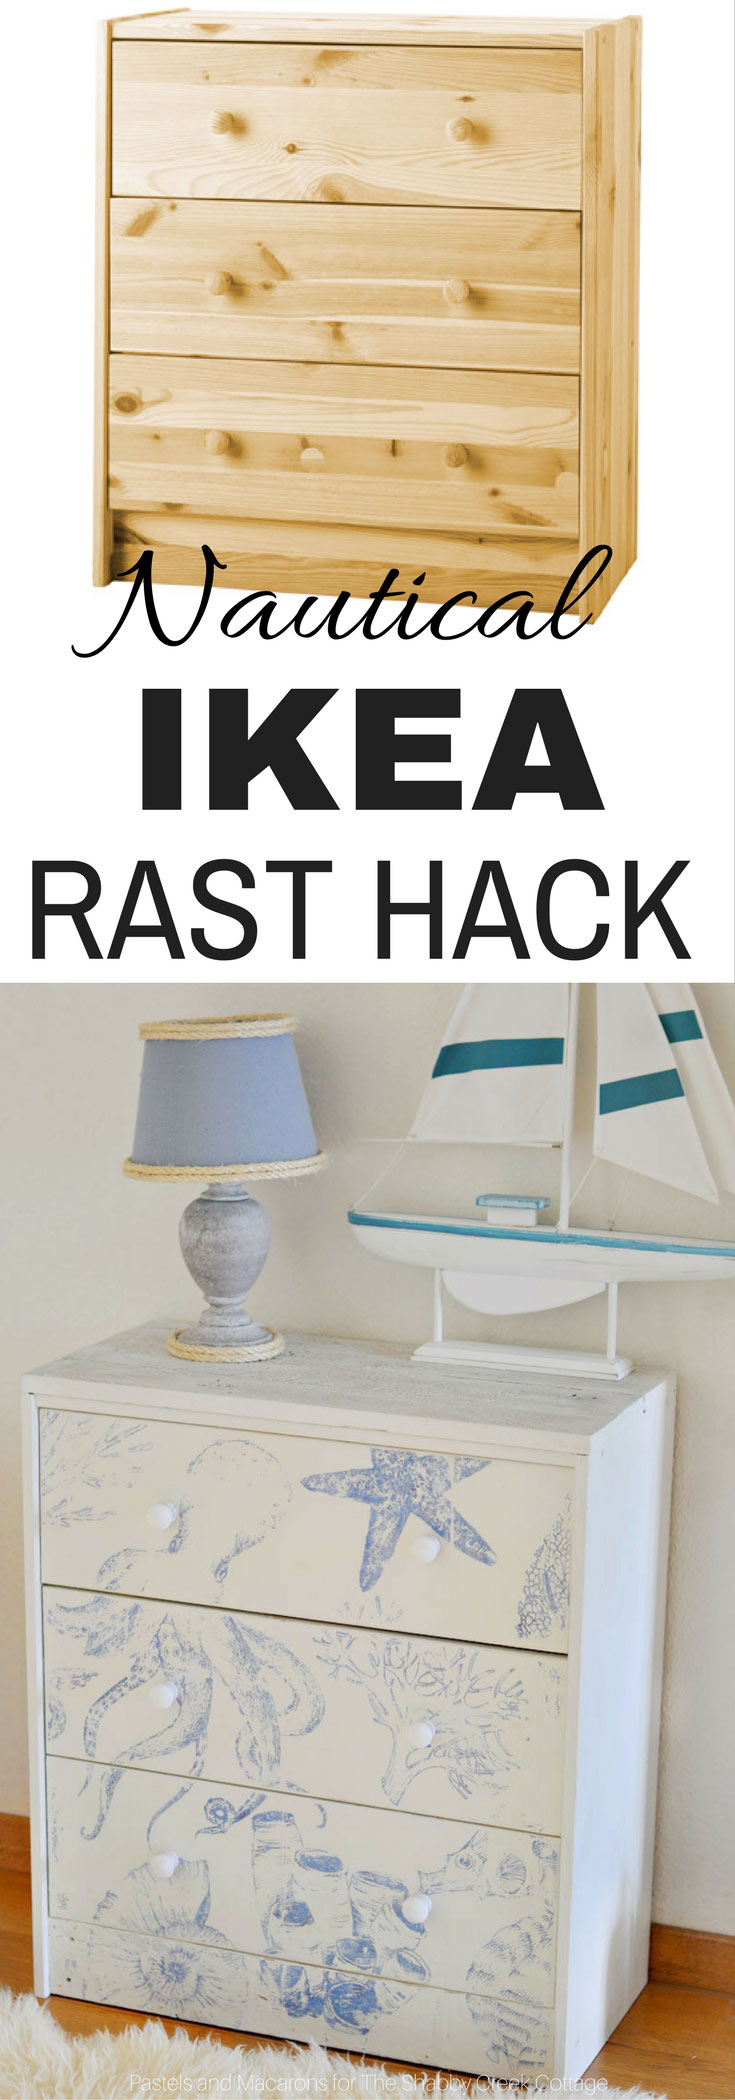 Unique and Beautiful Ikea Rast Hack for a Nautical Themed Bedroom. An easy DIY with big impact.